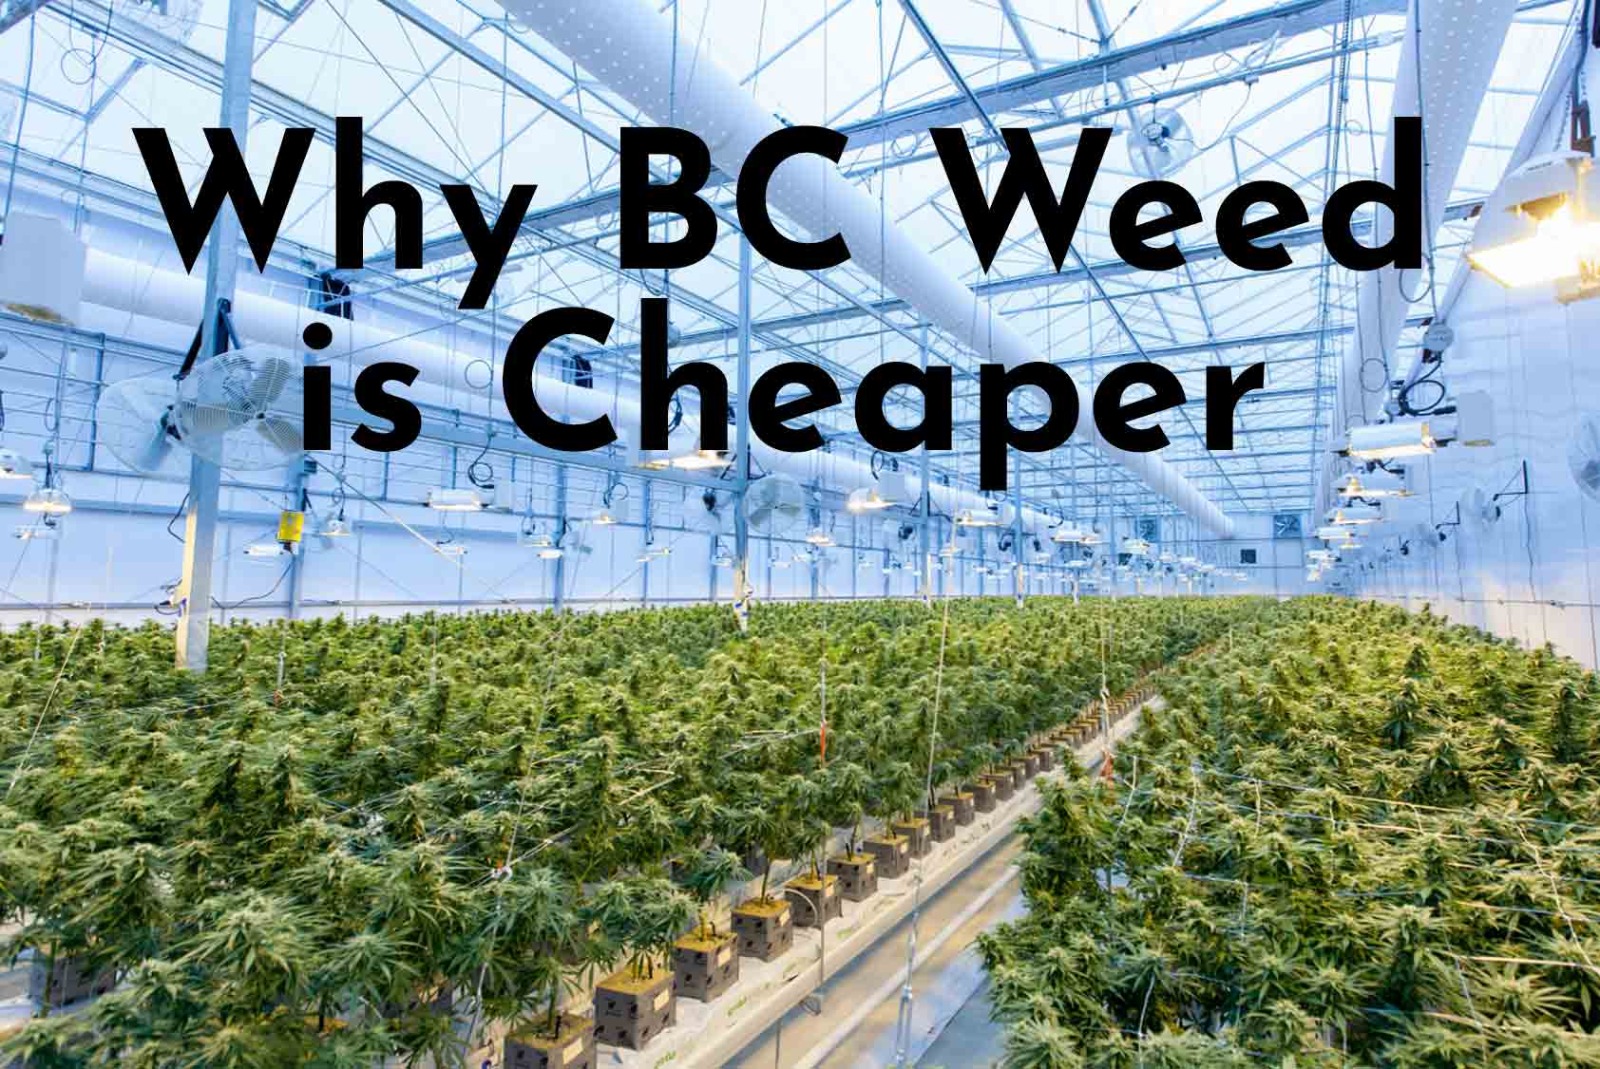 Why BC Weed is Cheaper over a cannabis indoor growing farm